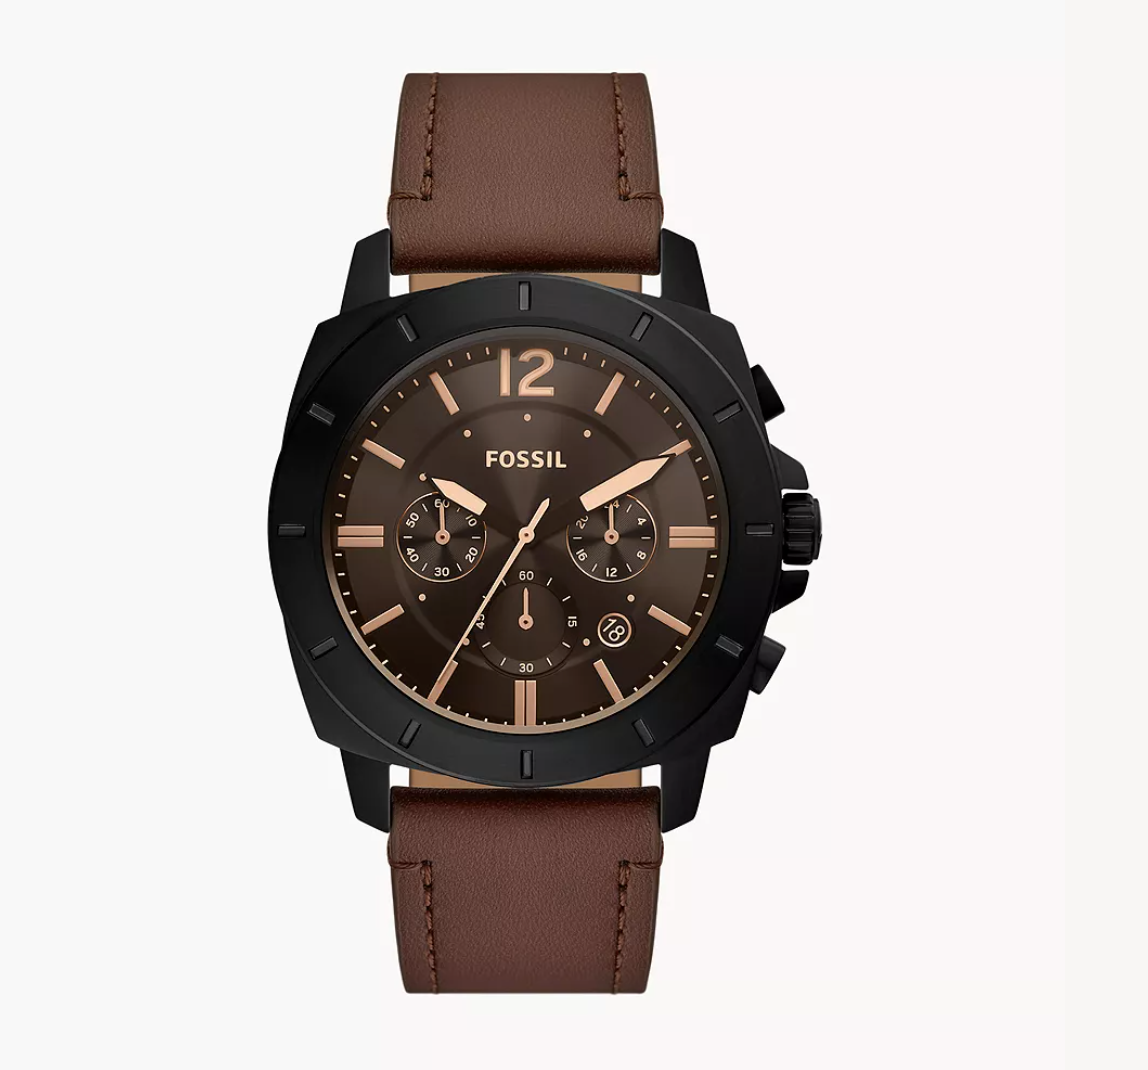 Fossil Men Privateer Chronograph Brown Leather Watch Bq2820 (Pre-Order)